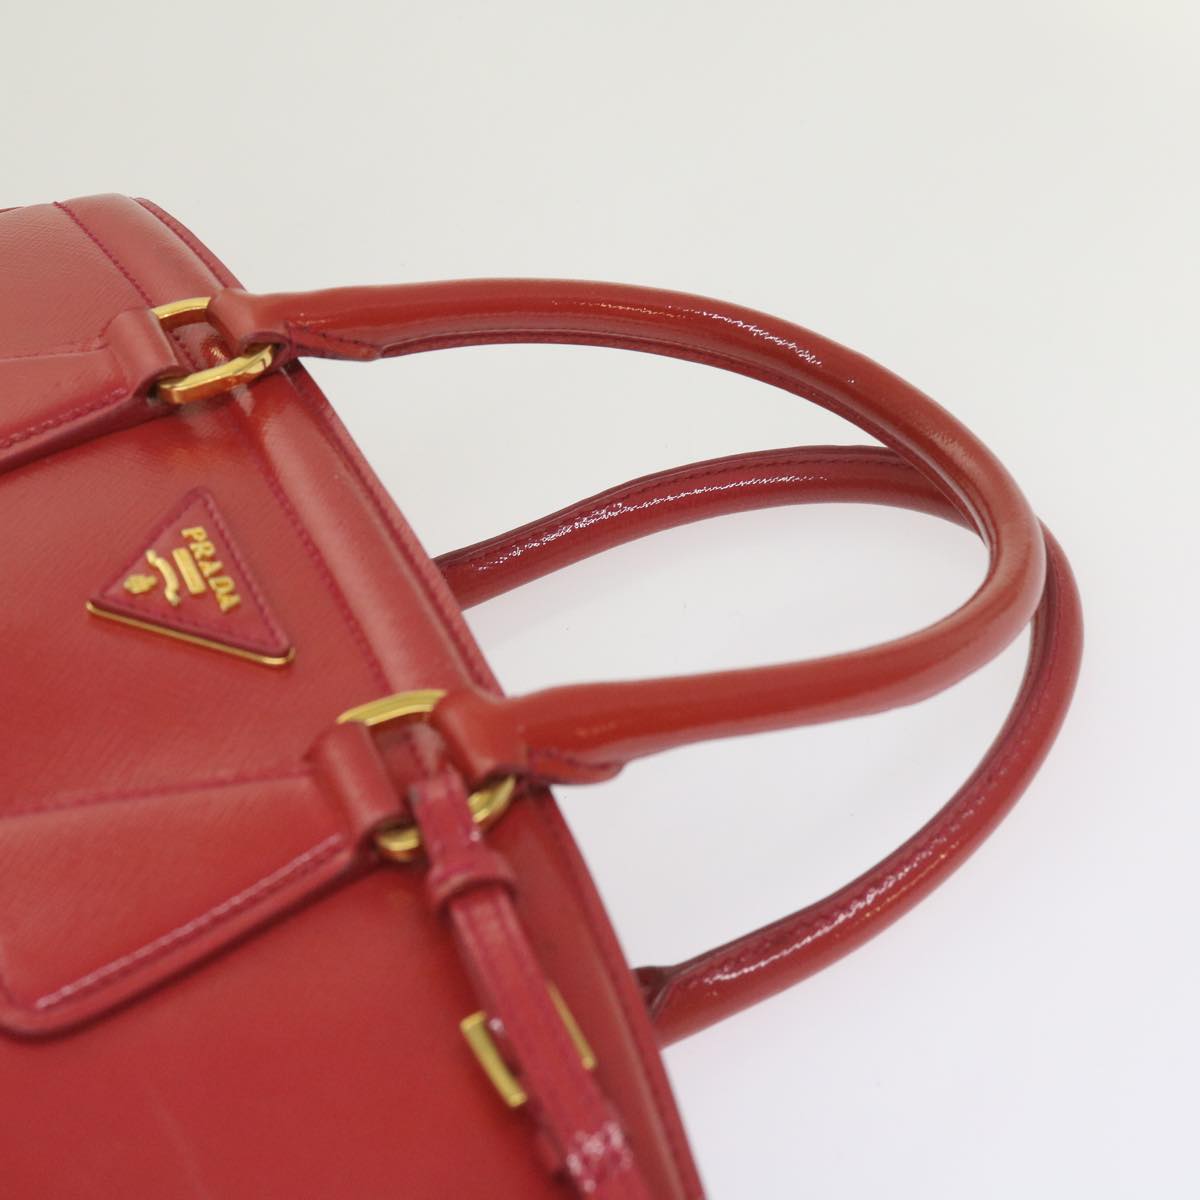 PRADA Hand Bag Leather Red Auth bs12371